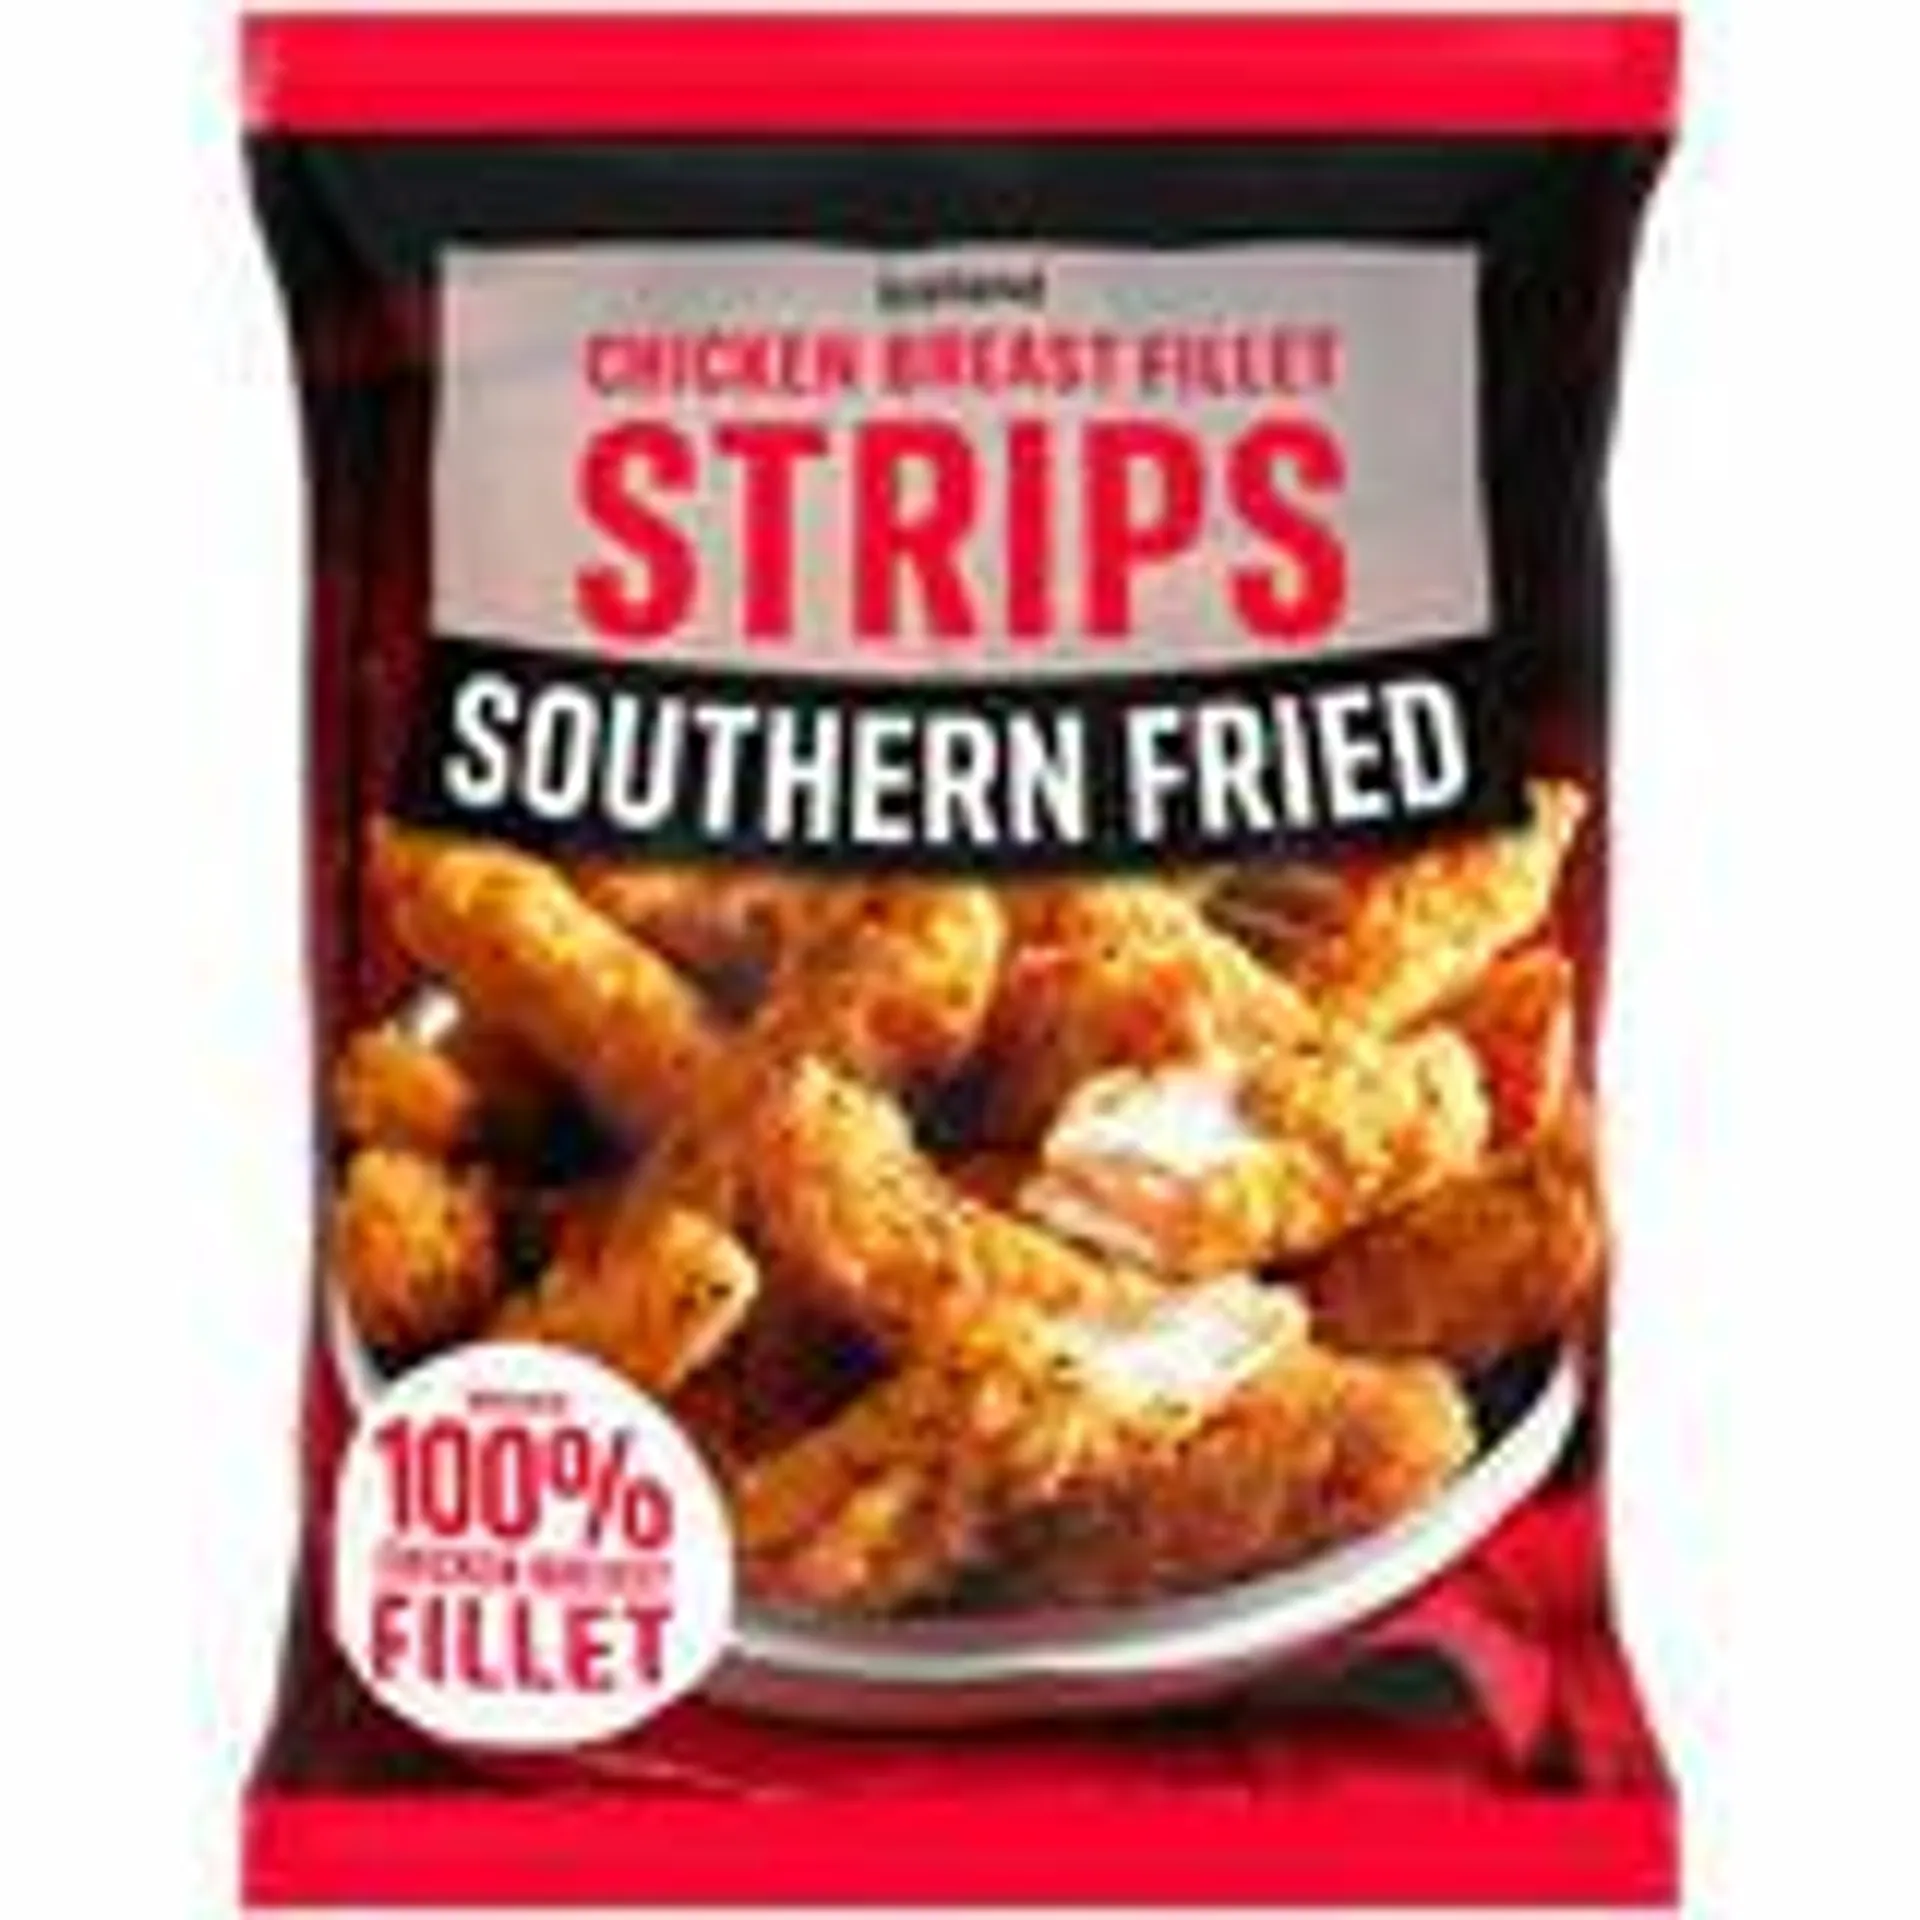 Iceland Southern Fried Chicken Breast Fillet Strips 500g